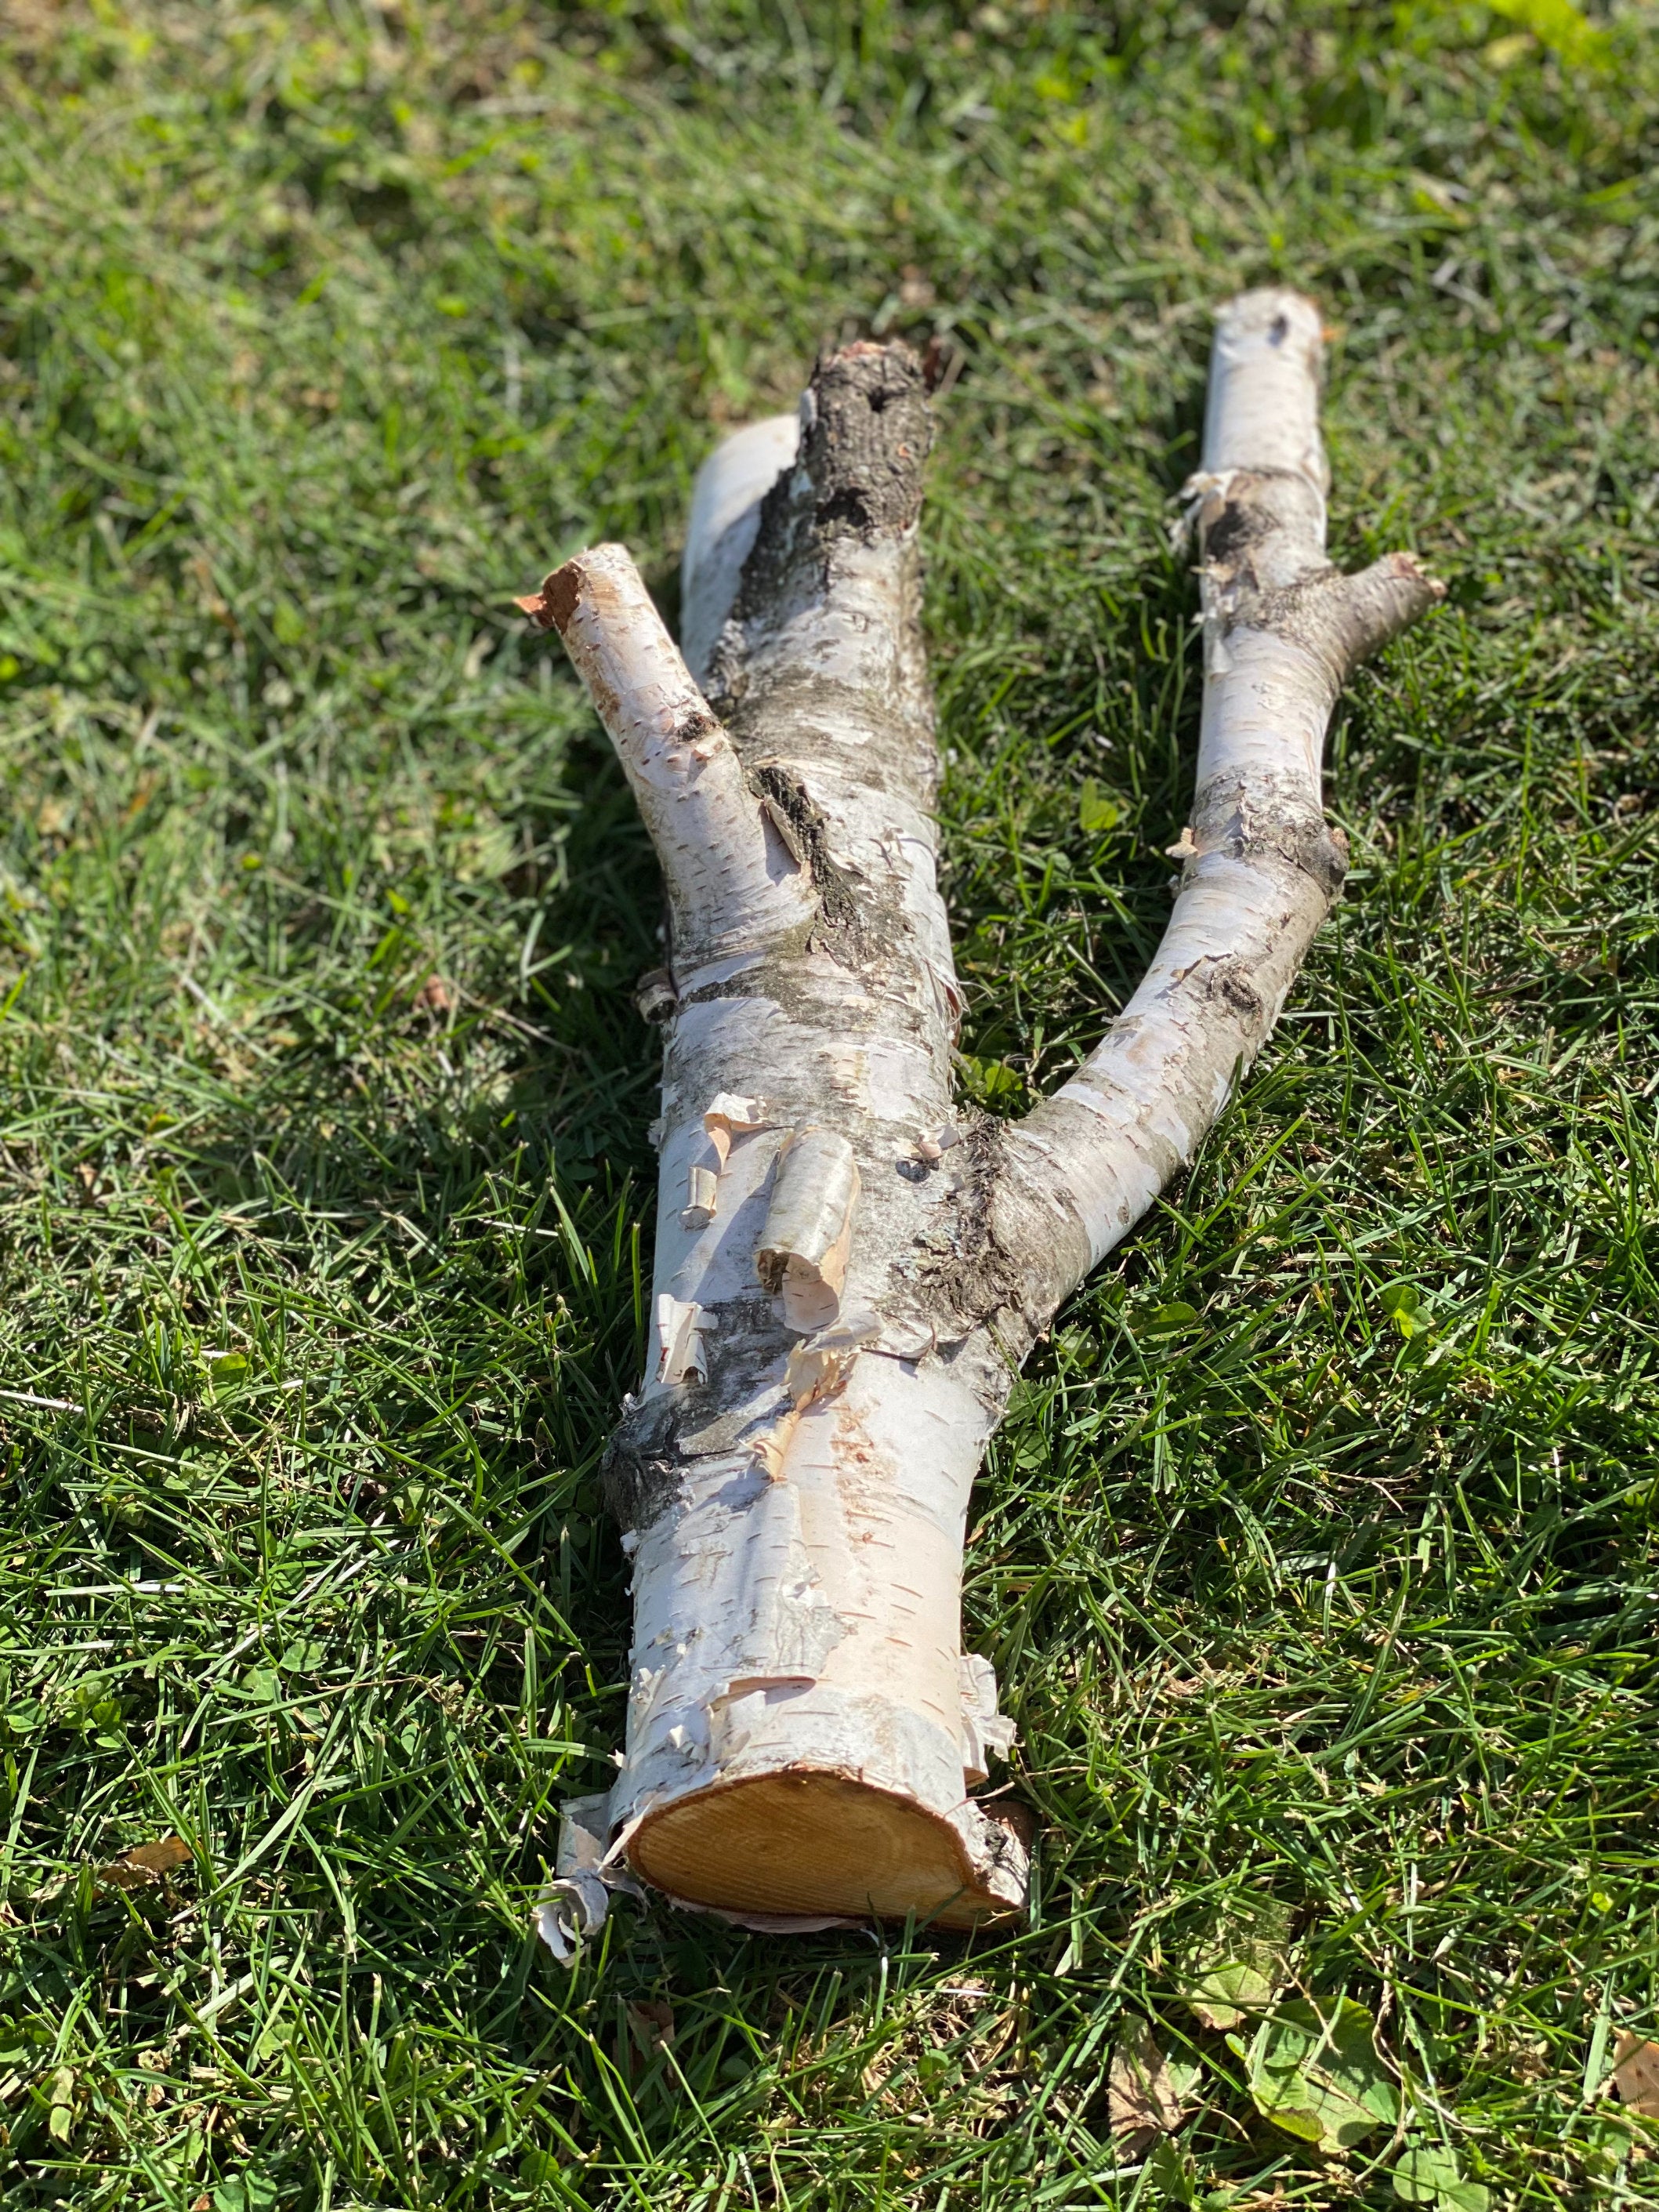 Unique White Birch Log, Approximately 16.5 Inches Long by about 7 Inches Wide and 5 Inches Tall